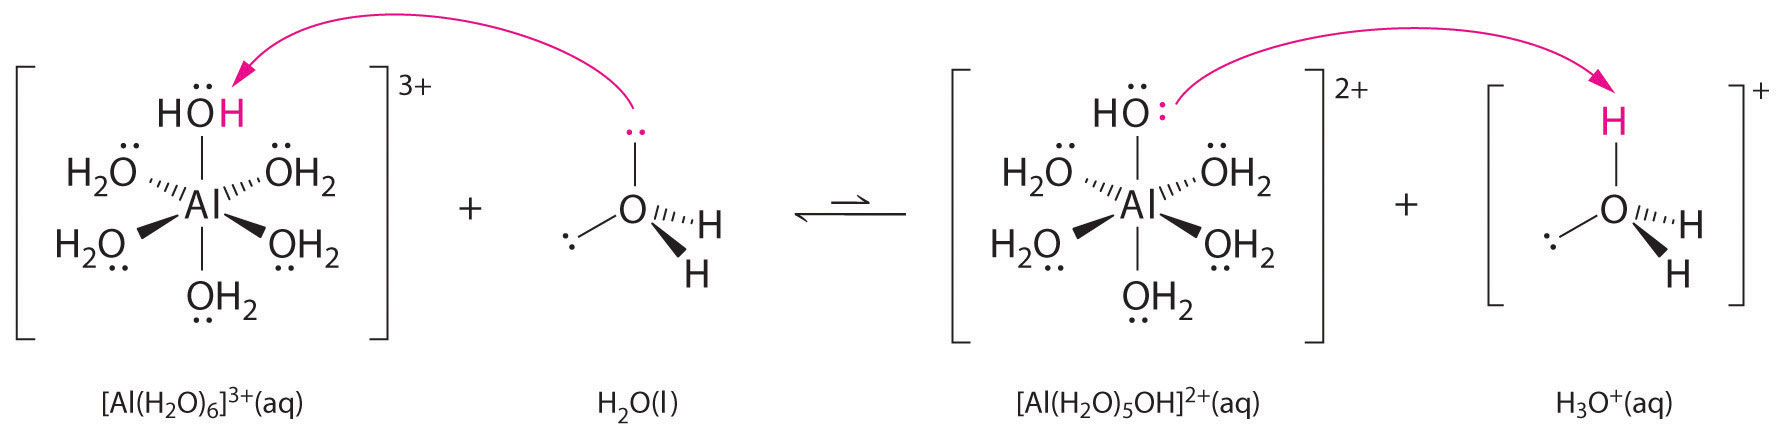 A hexaaquaaluminium ion with a plus three charge reacts with water to produce pentaaquahydroxoaluminium (III) with a plus 2 charge and a hydronium ion.